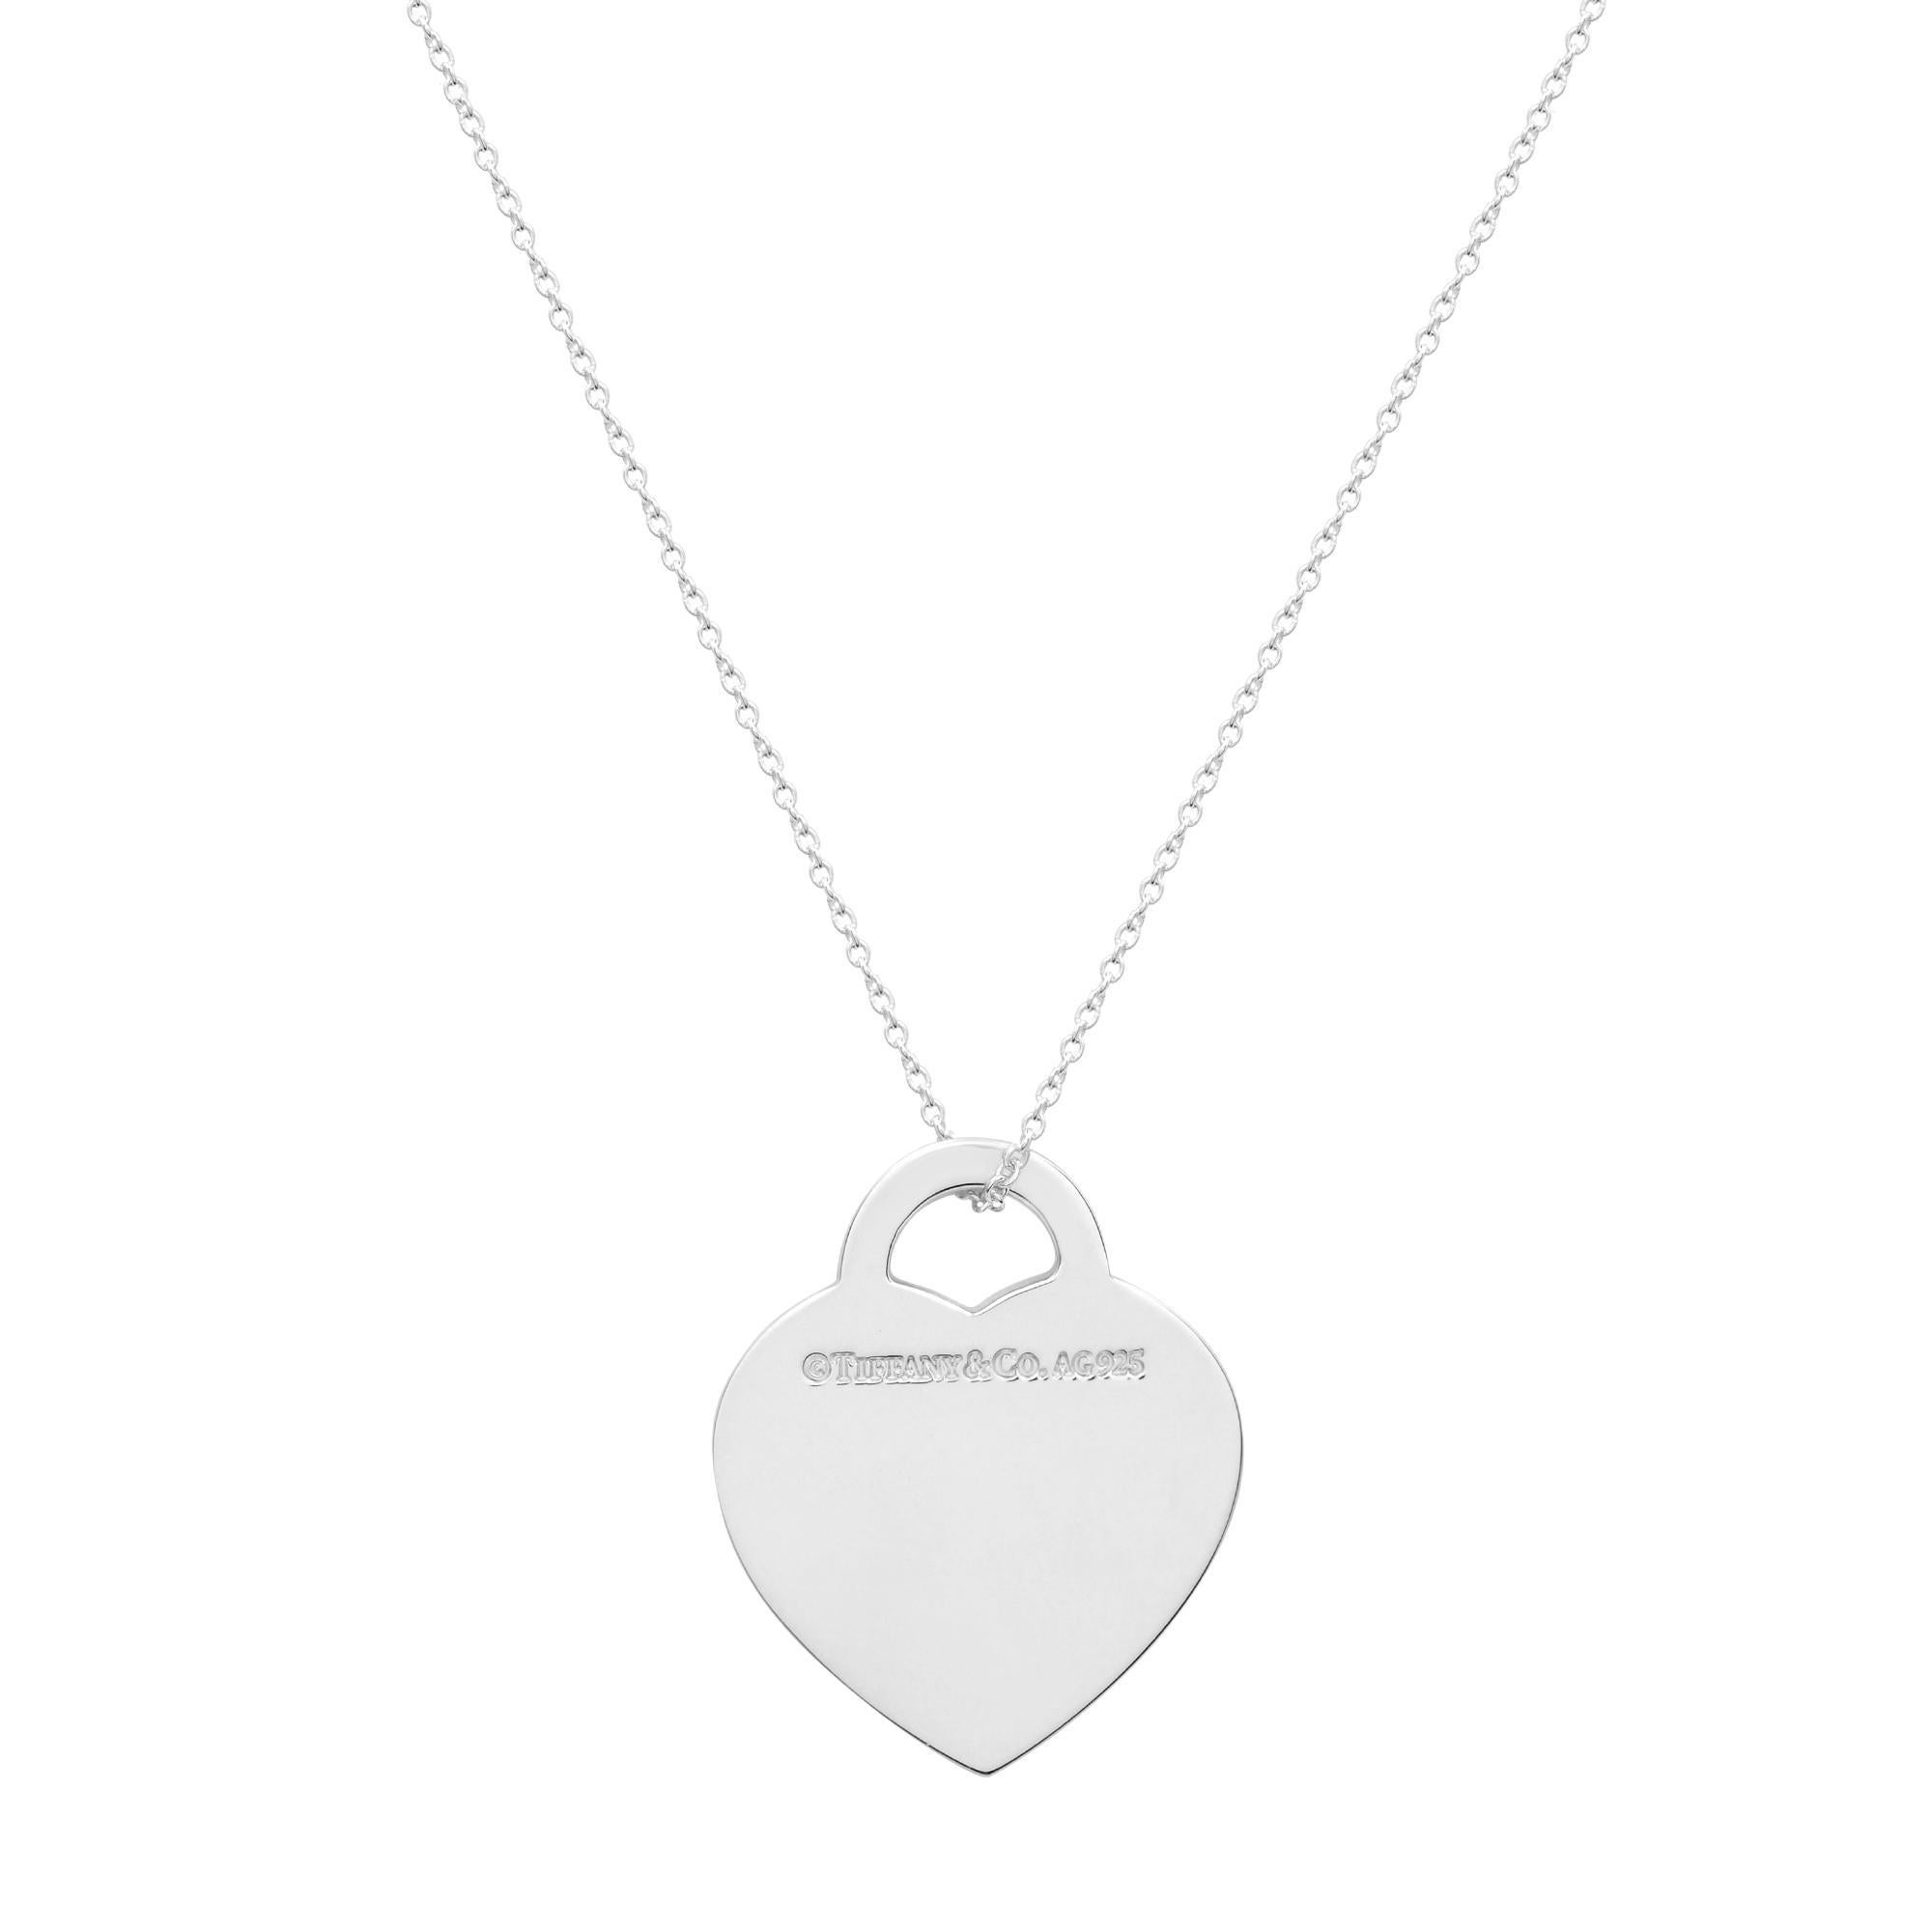 Simple yet elegant the Return to Tiffany heart pendant necklace designed in sterling silver 925. This heart tag pendant comes with engraving on the front and stamped on the back. Necklace length: 15 Inches. Pendant Size: 25.3mm x 20.7mm. Total